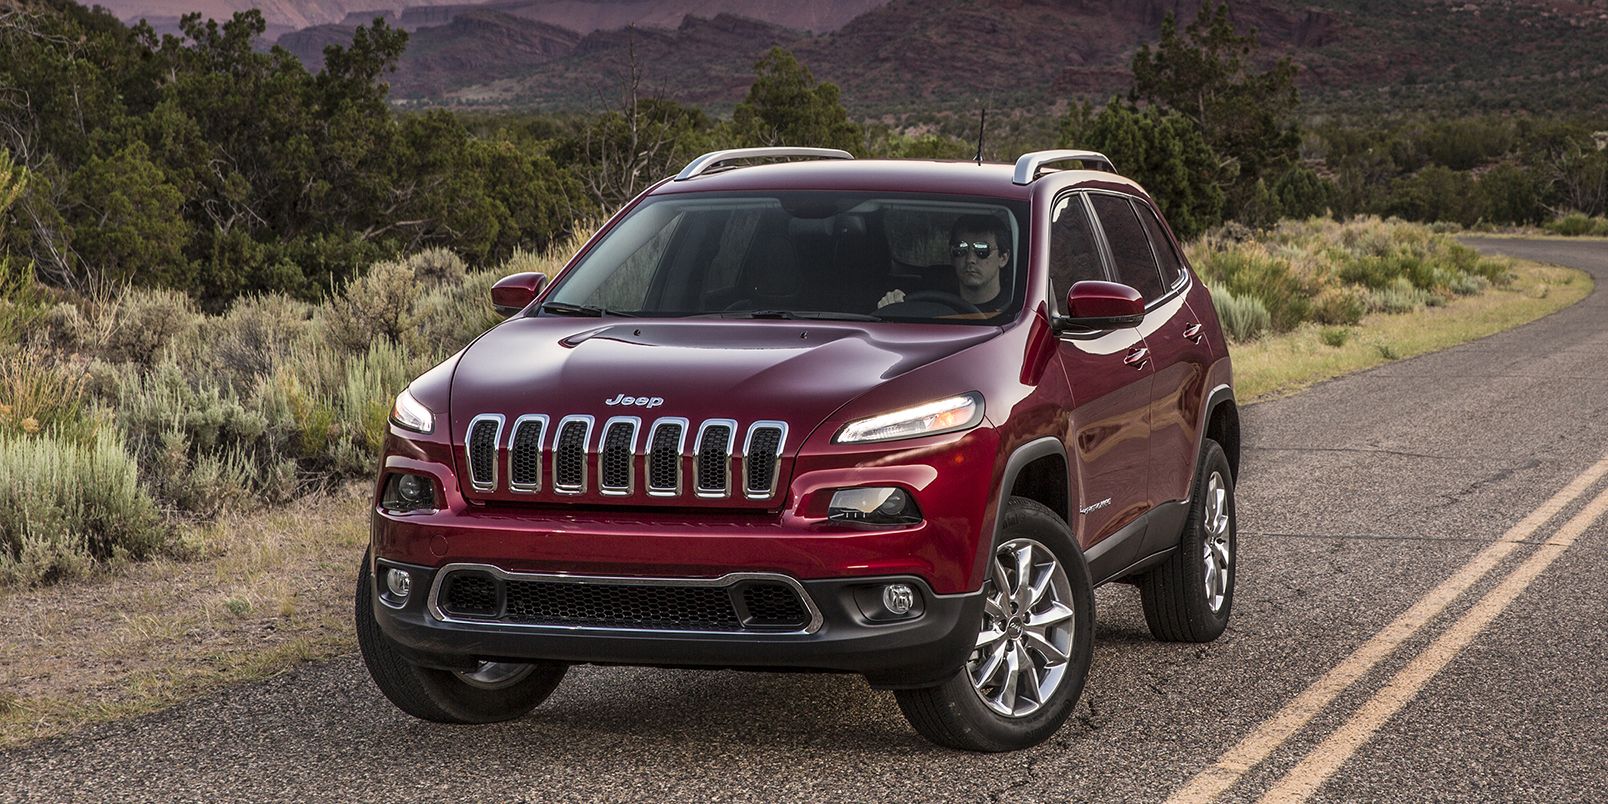 Jeep Issues Park-Outside Warning for 2014-2016 Cherokee